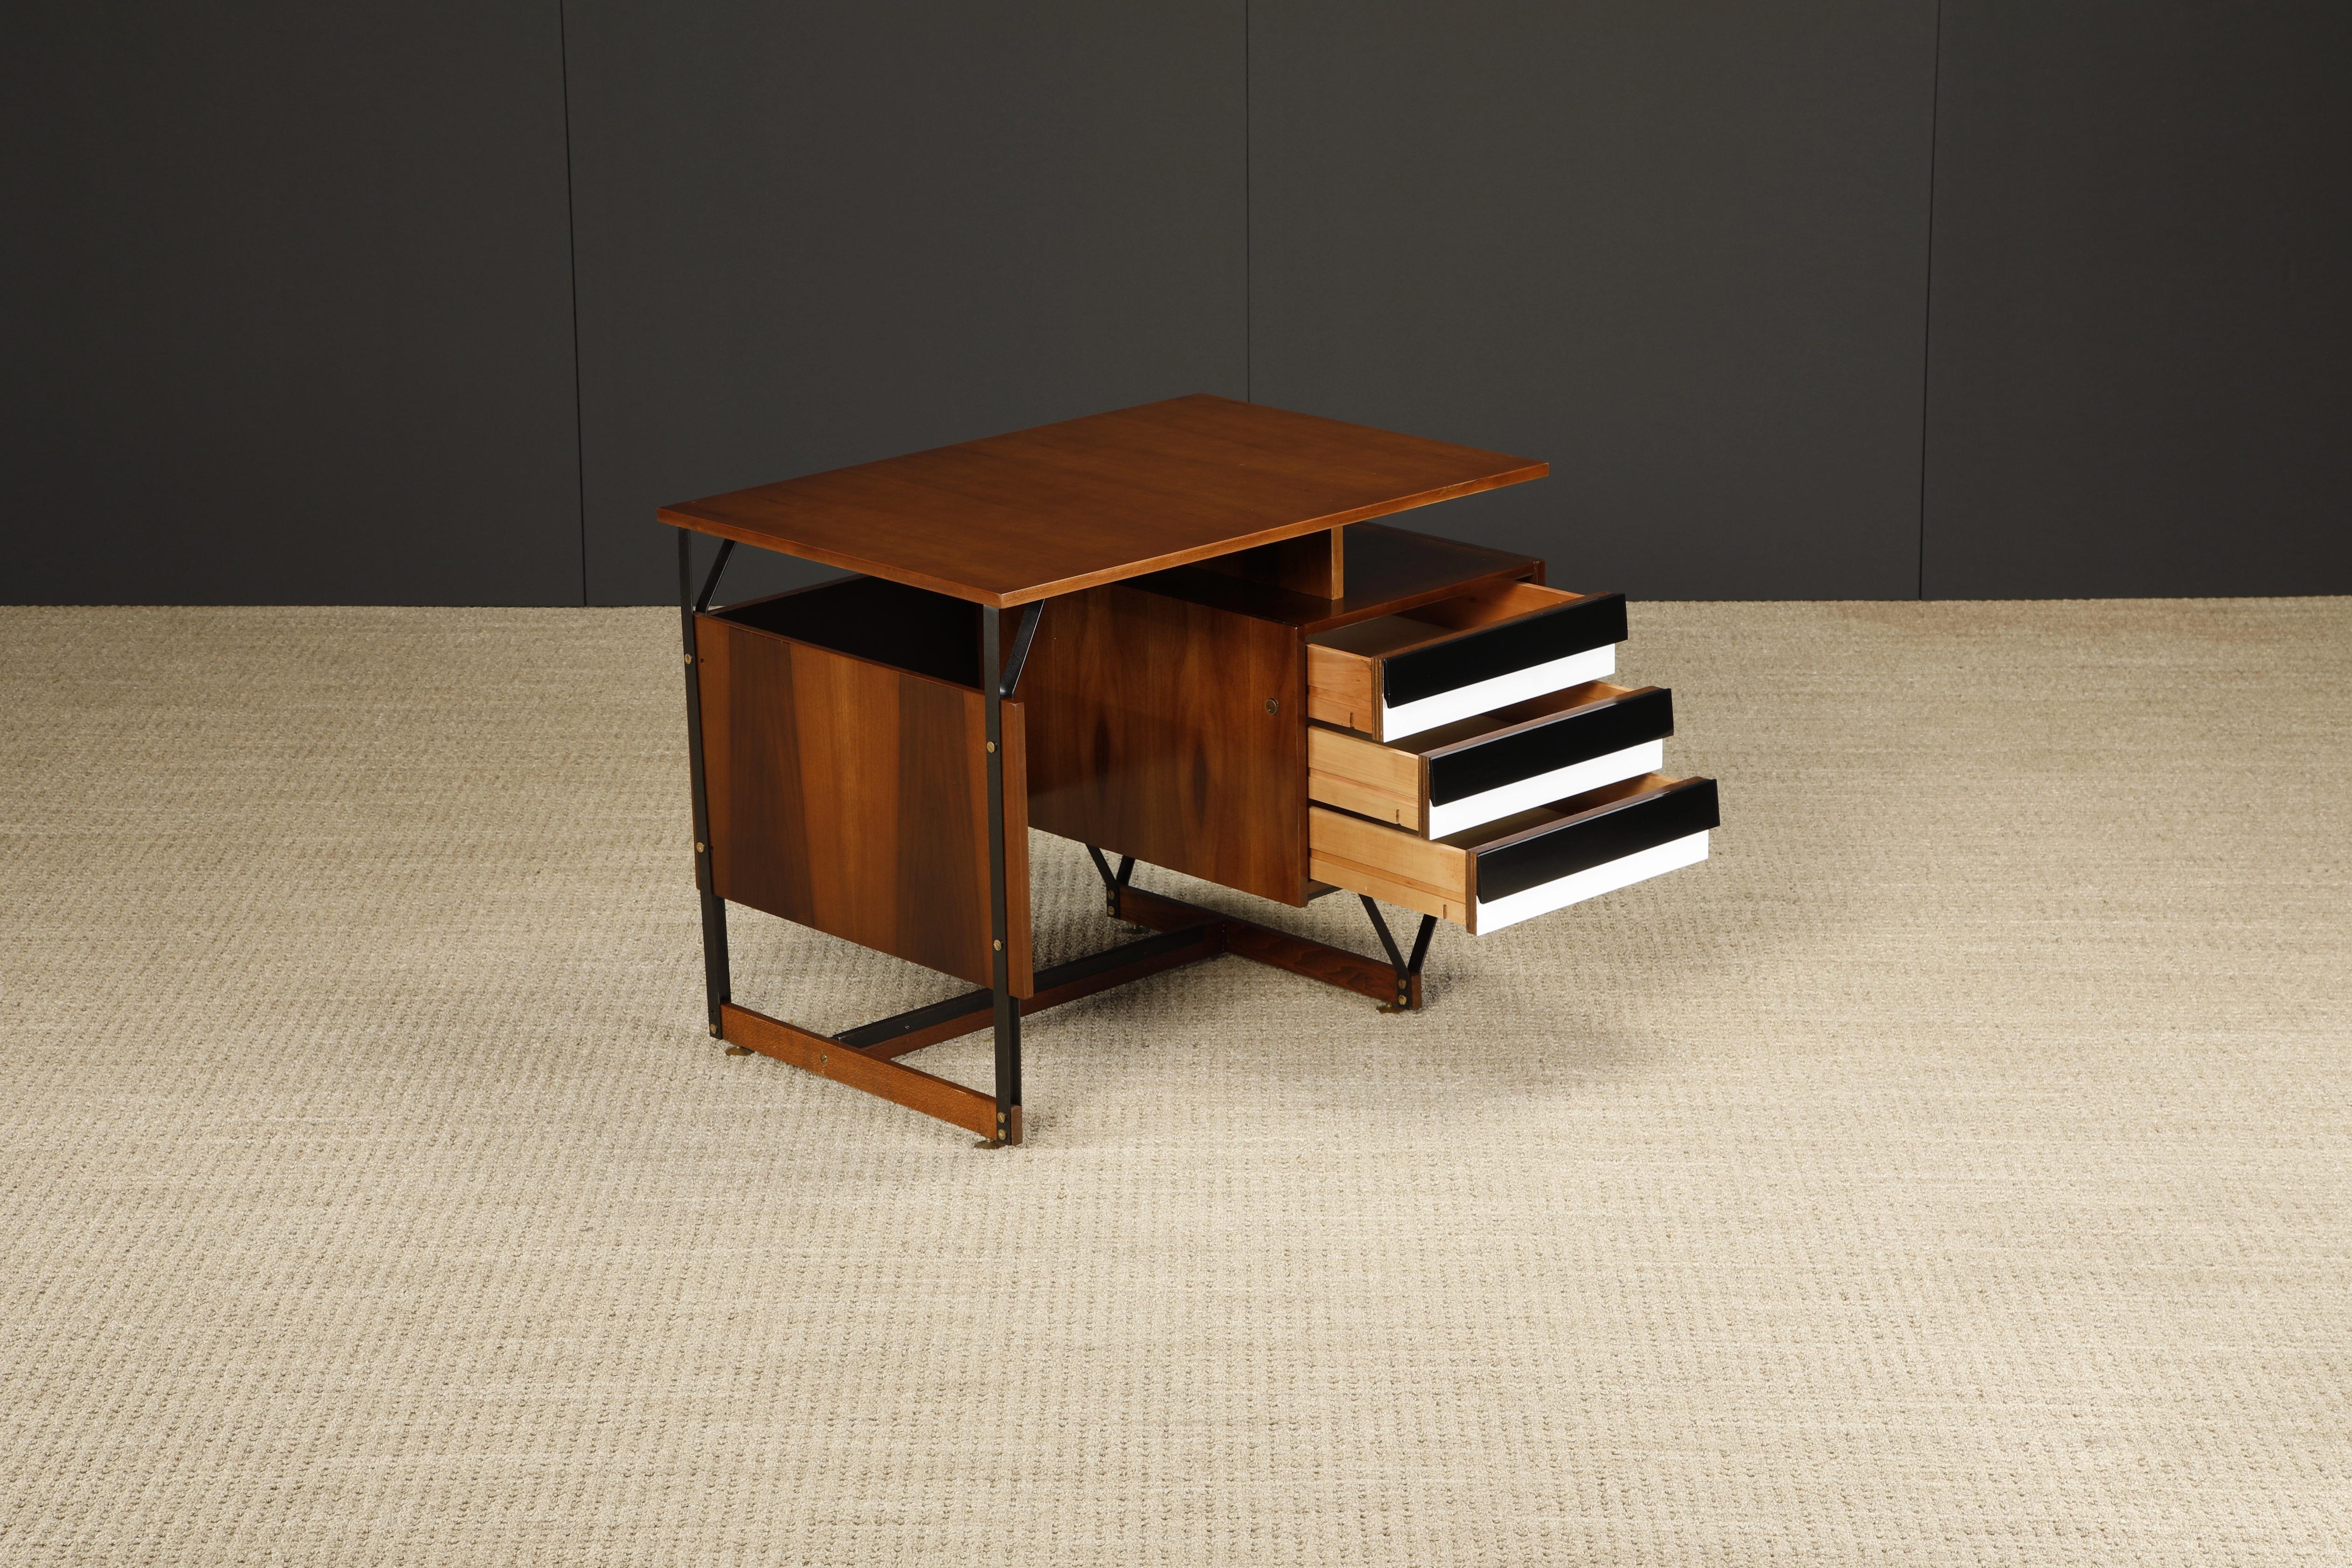 Italian Mid-Century Modern Desk, Style of Gio Ponti, c 1950s, Refinished In Excellent Condition For Sale In Los Angeles, CA